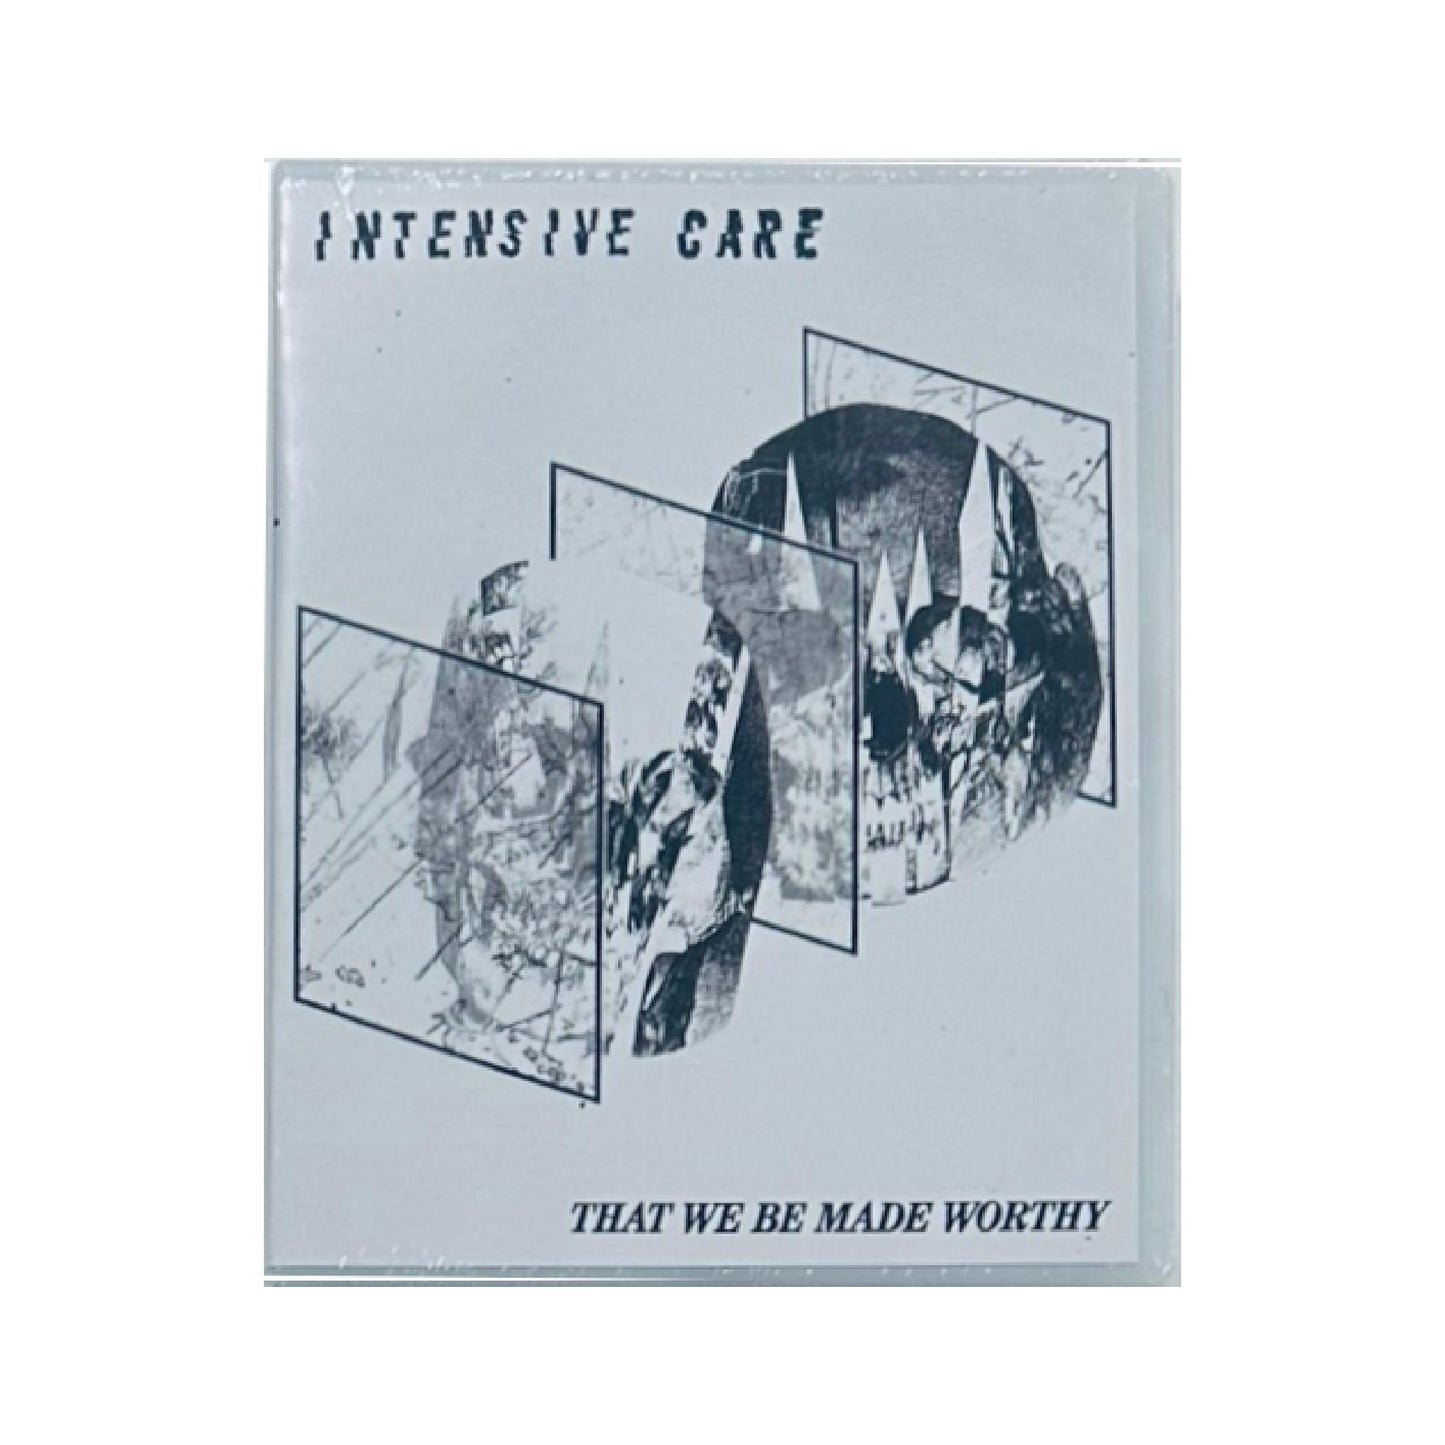 Intensive Care - That We Be Made Worthy CS (2x cassette tape set)